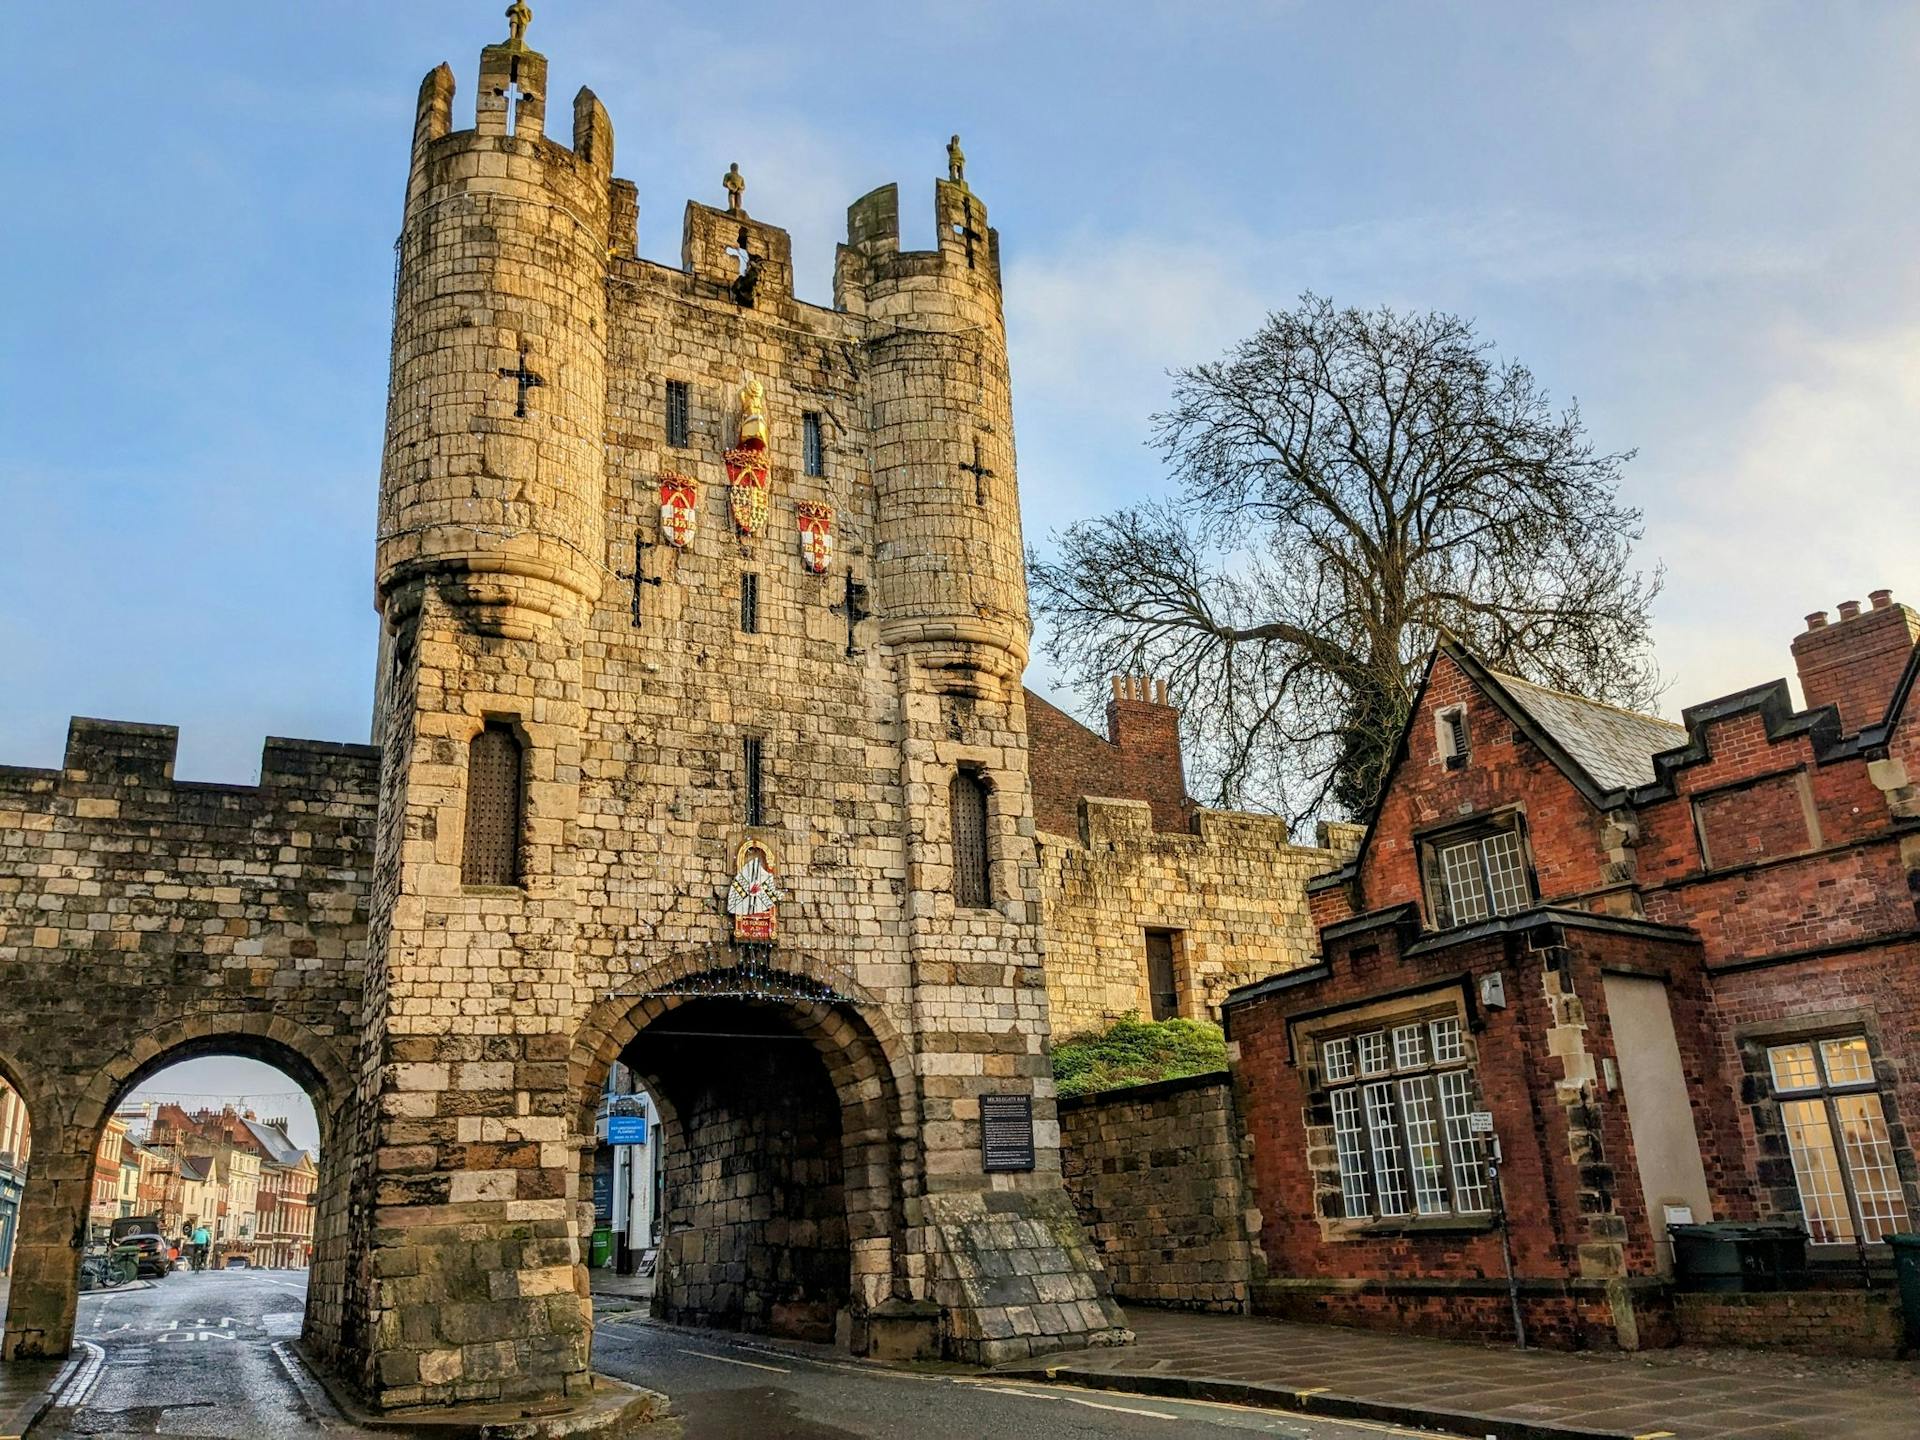 <p>Micklegate Bar York is a historic gateway to the city that has witnessed royal ceremonies and medieval fortifications. </p><p><br></p><p>It’s a must-see for anyone interested in York’s rich and turbulent past. #MicklegateBar #York #History #Travel</p><p><br></p>